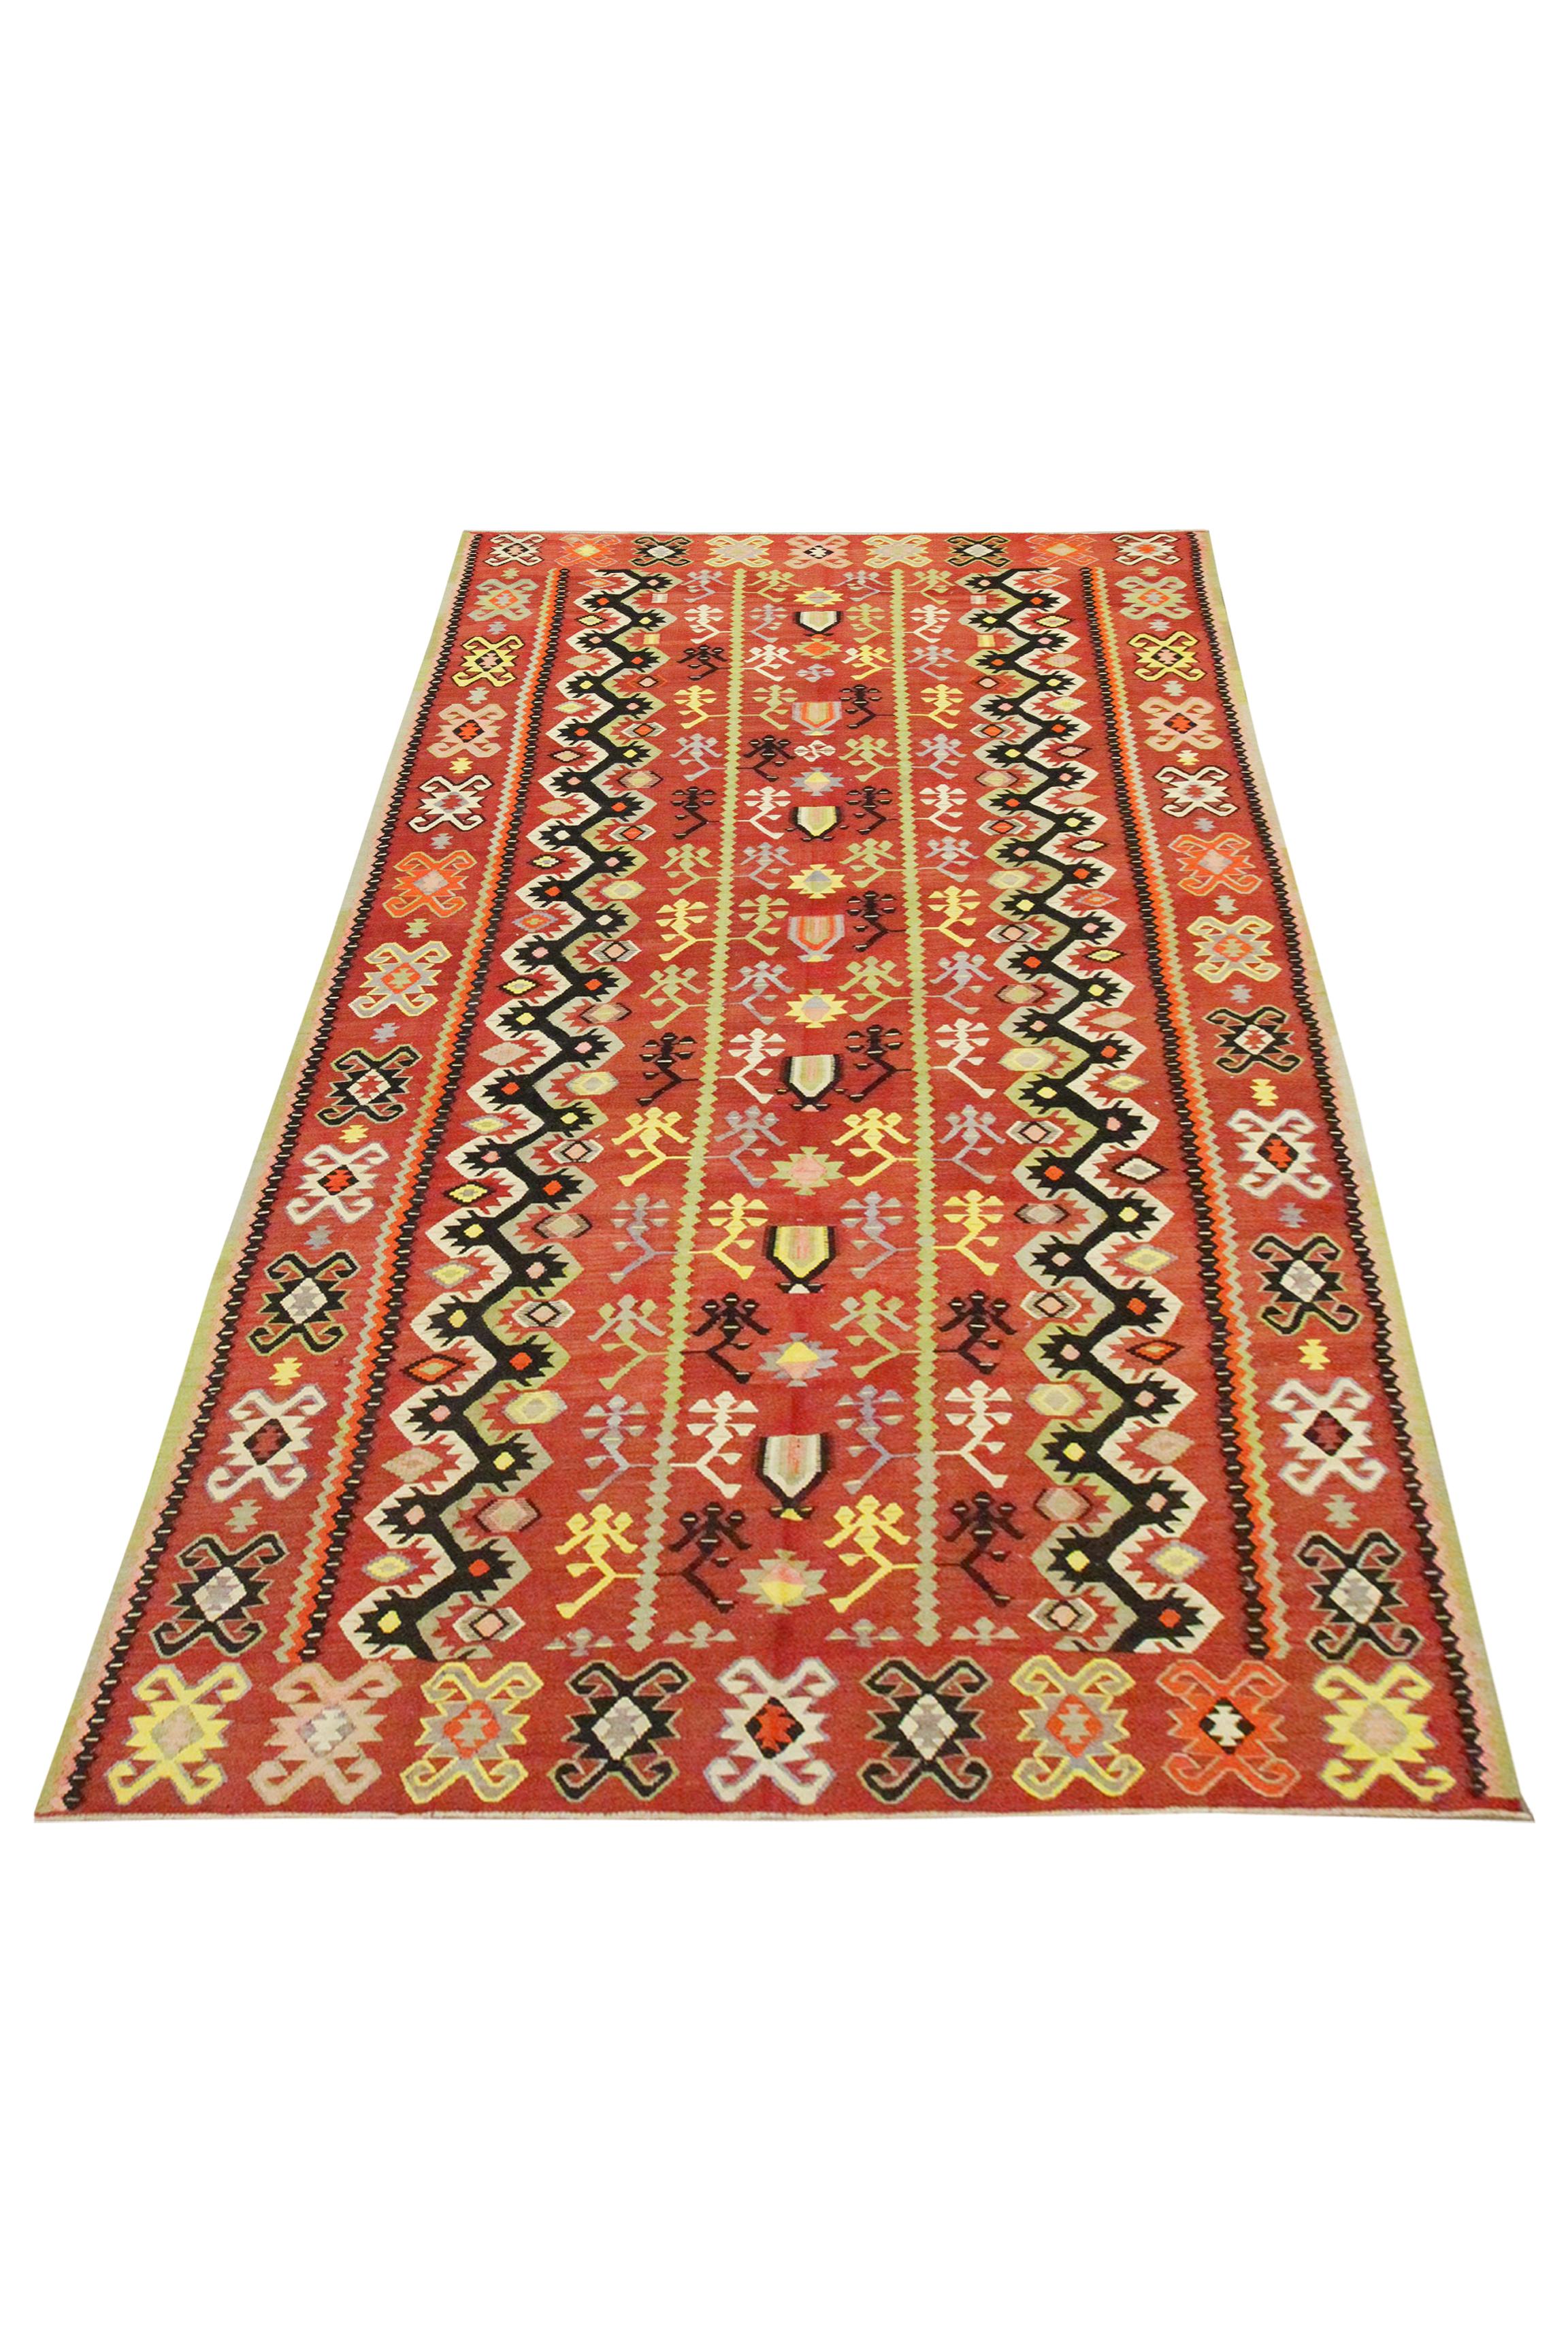 Hand-Woven Handmade Turkish Kilim Traditional Wool Rust-Red Flat-woven Area Rug For Sale